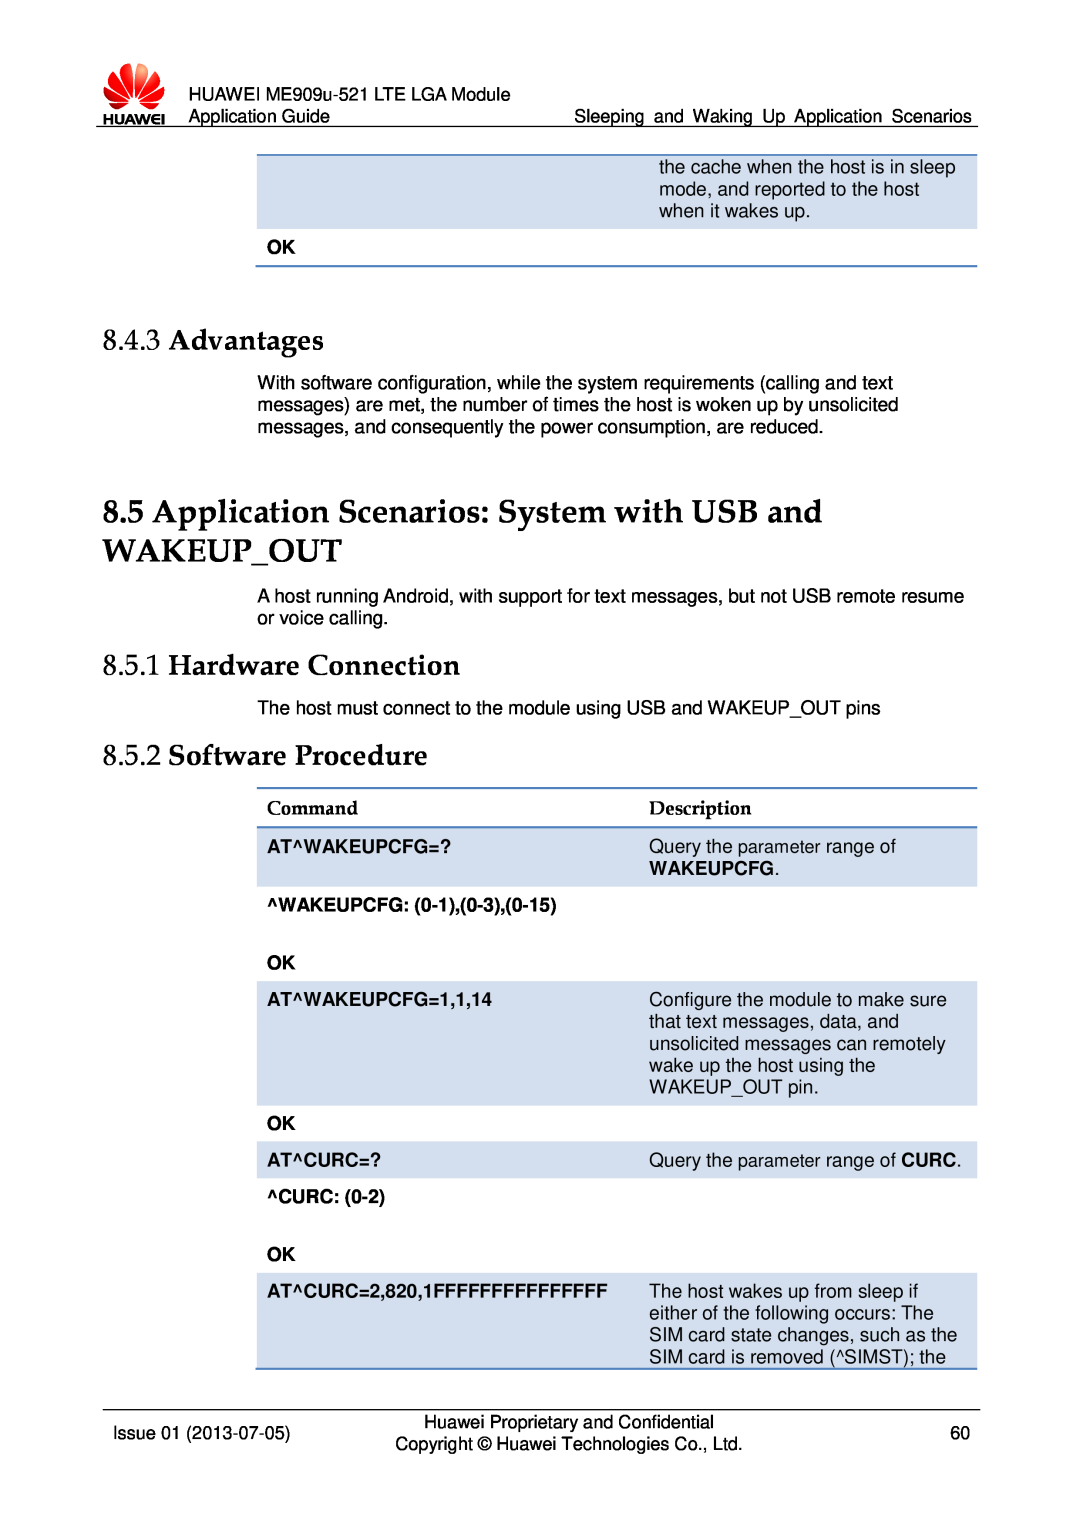 Huawei ME909u-521 Application Scenarios System with USB and WAKEUPOUT, Advantages, Hardware Connection, Software Procedure 